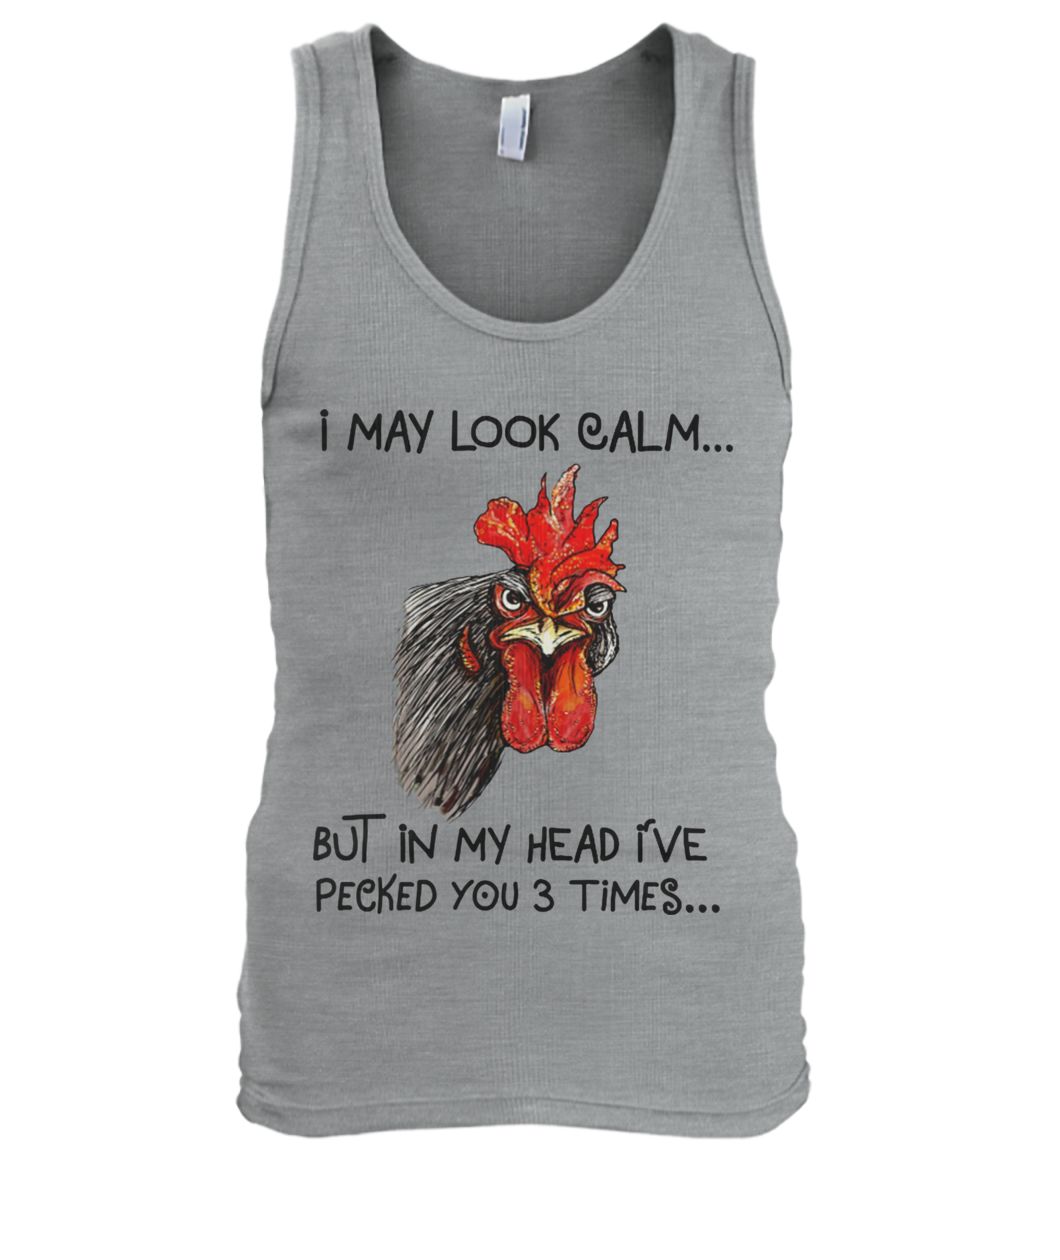 Chicken I may look calm but in my head I've pecked you 3 times men's tank top